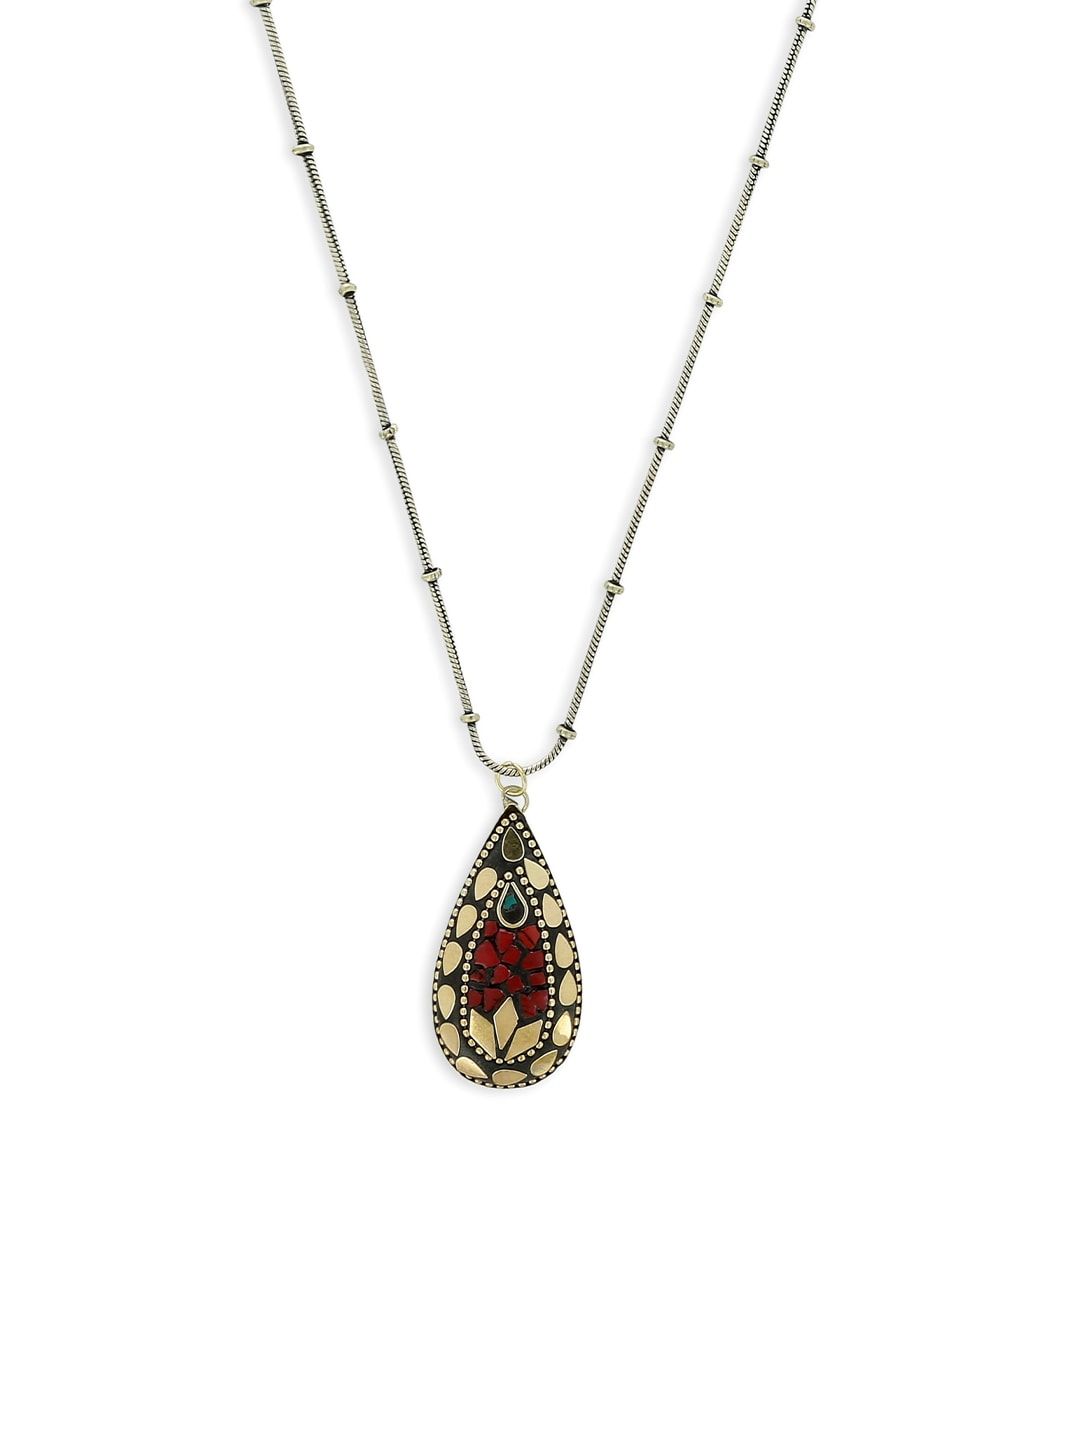 EL REGALO Women Red & Gold Tribal Necklace - for Women and Girls
Style ID: 17119270